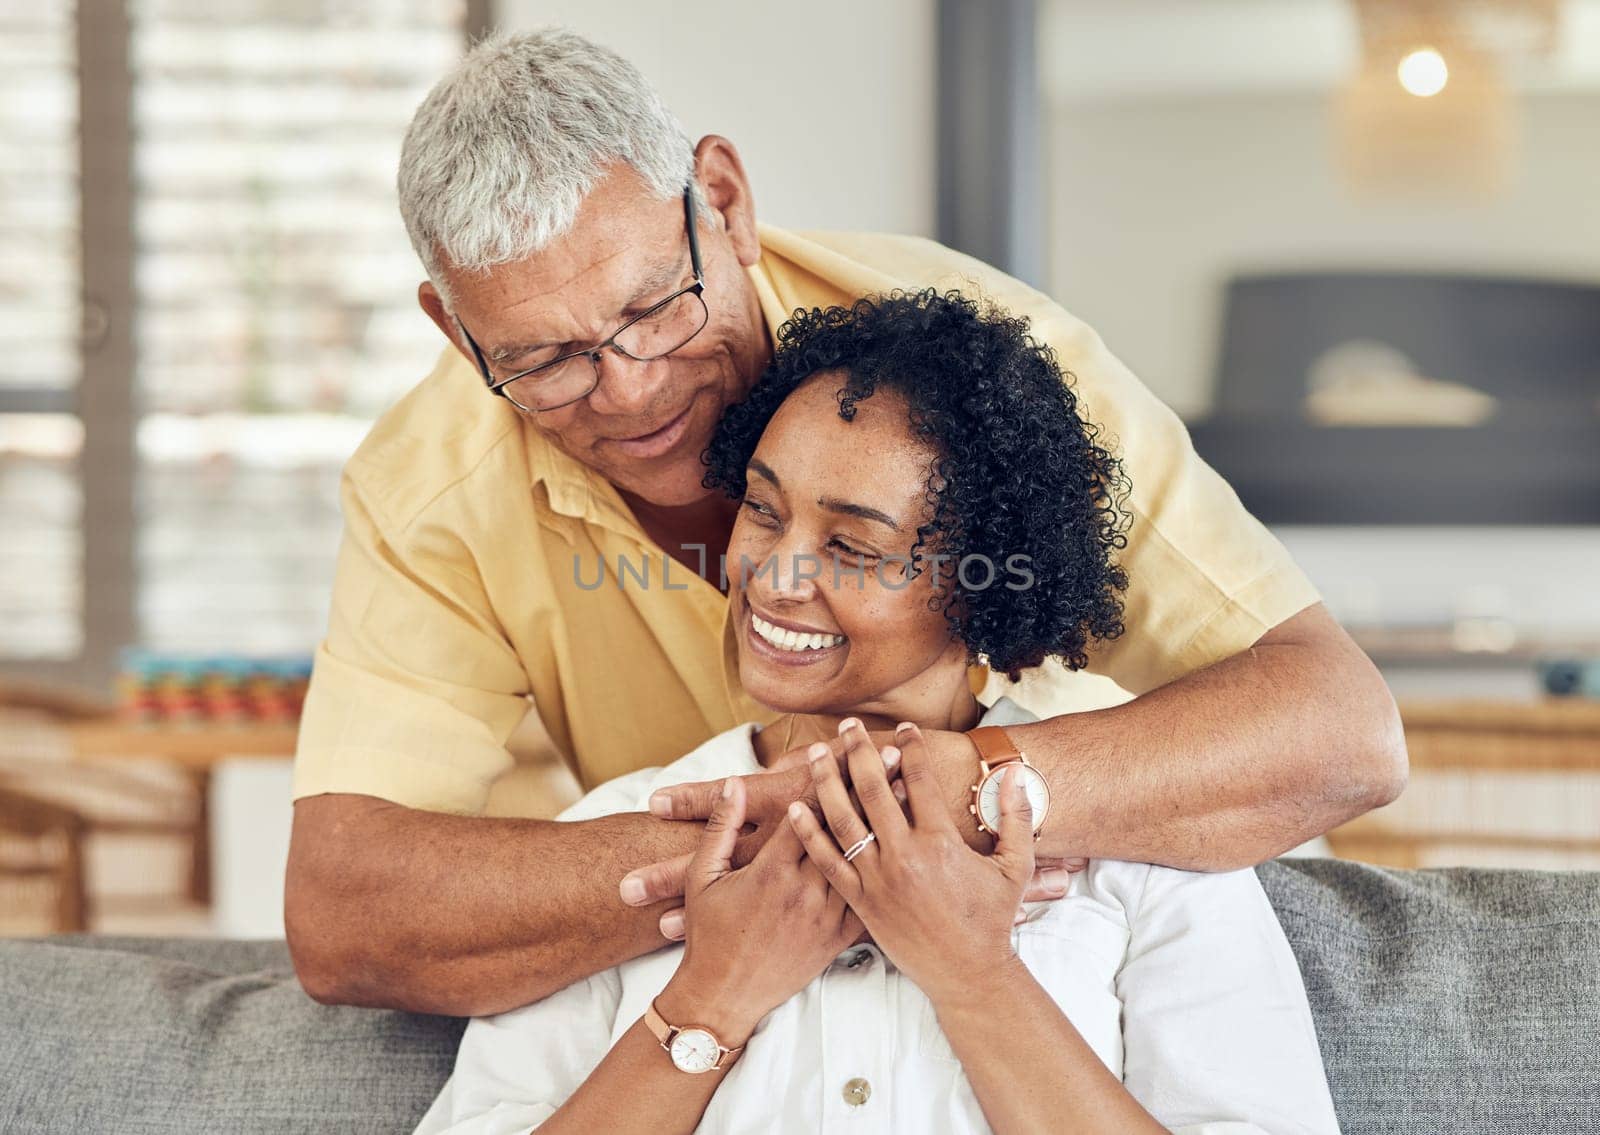 Love, relax and senior couple hug, care and enjoy quality bonding time on home living room sofa. Retirement happiness, marriage smile and romantic elderly husband, wife or people happy together.